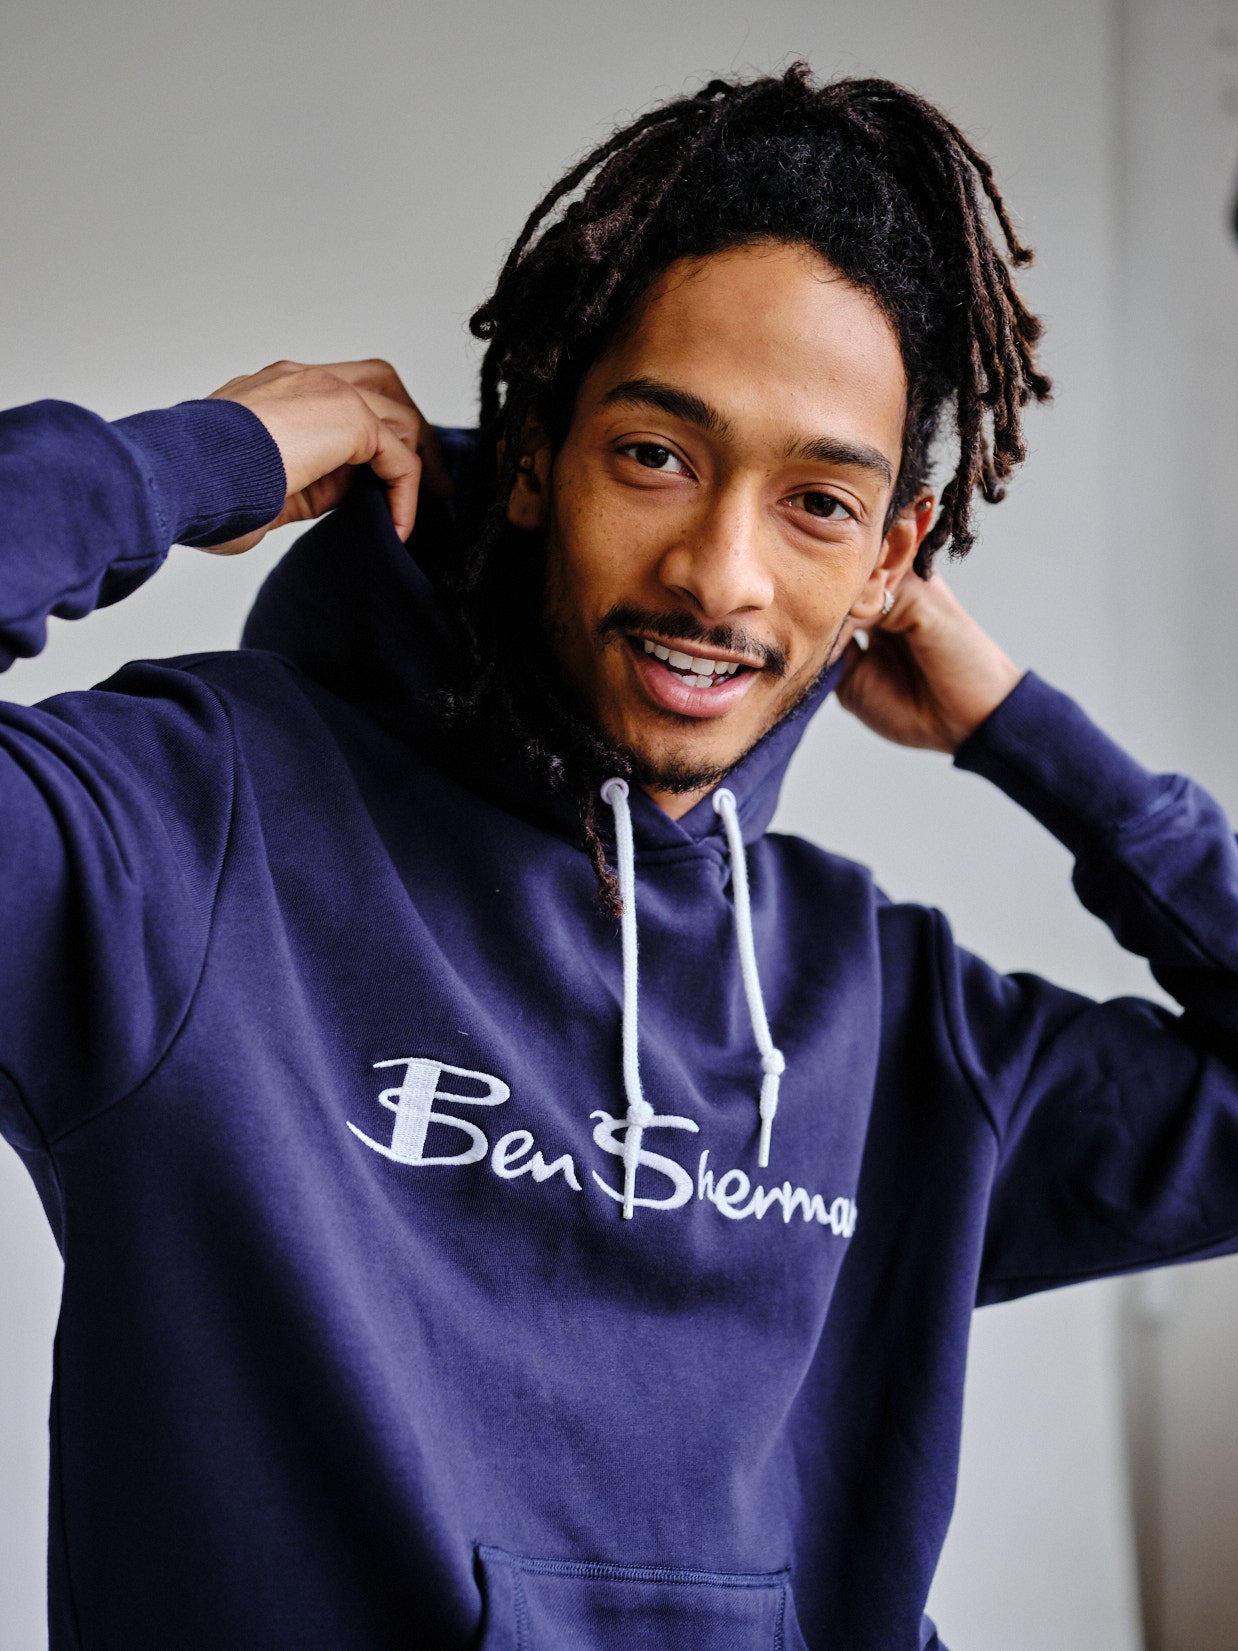 Thomas wears the Embroidered Logo Hoodie in dark navy